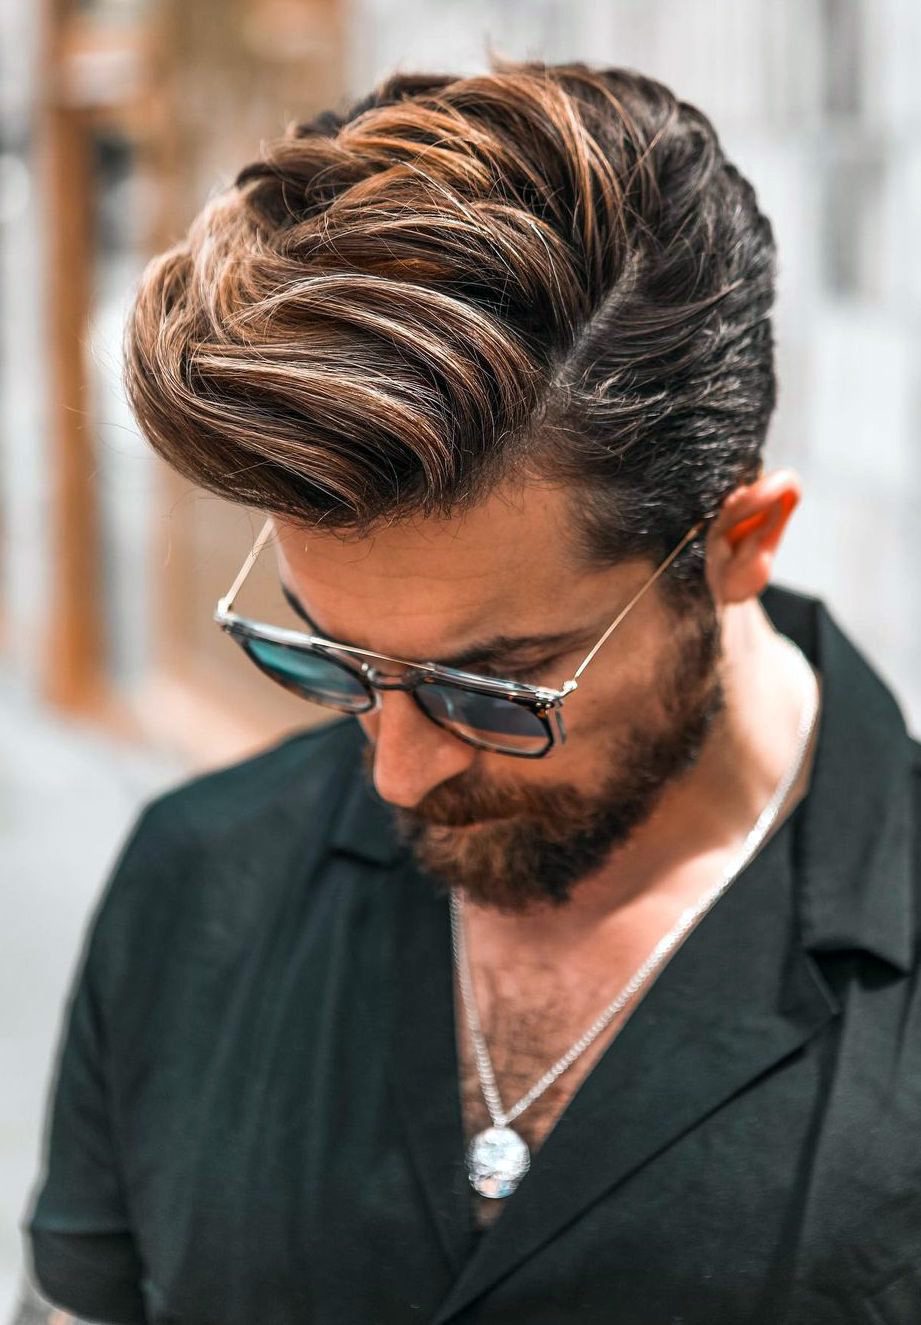 Common Men's Hairstyle Problems – How To Fix A Bad Hair Day | FashionBeans